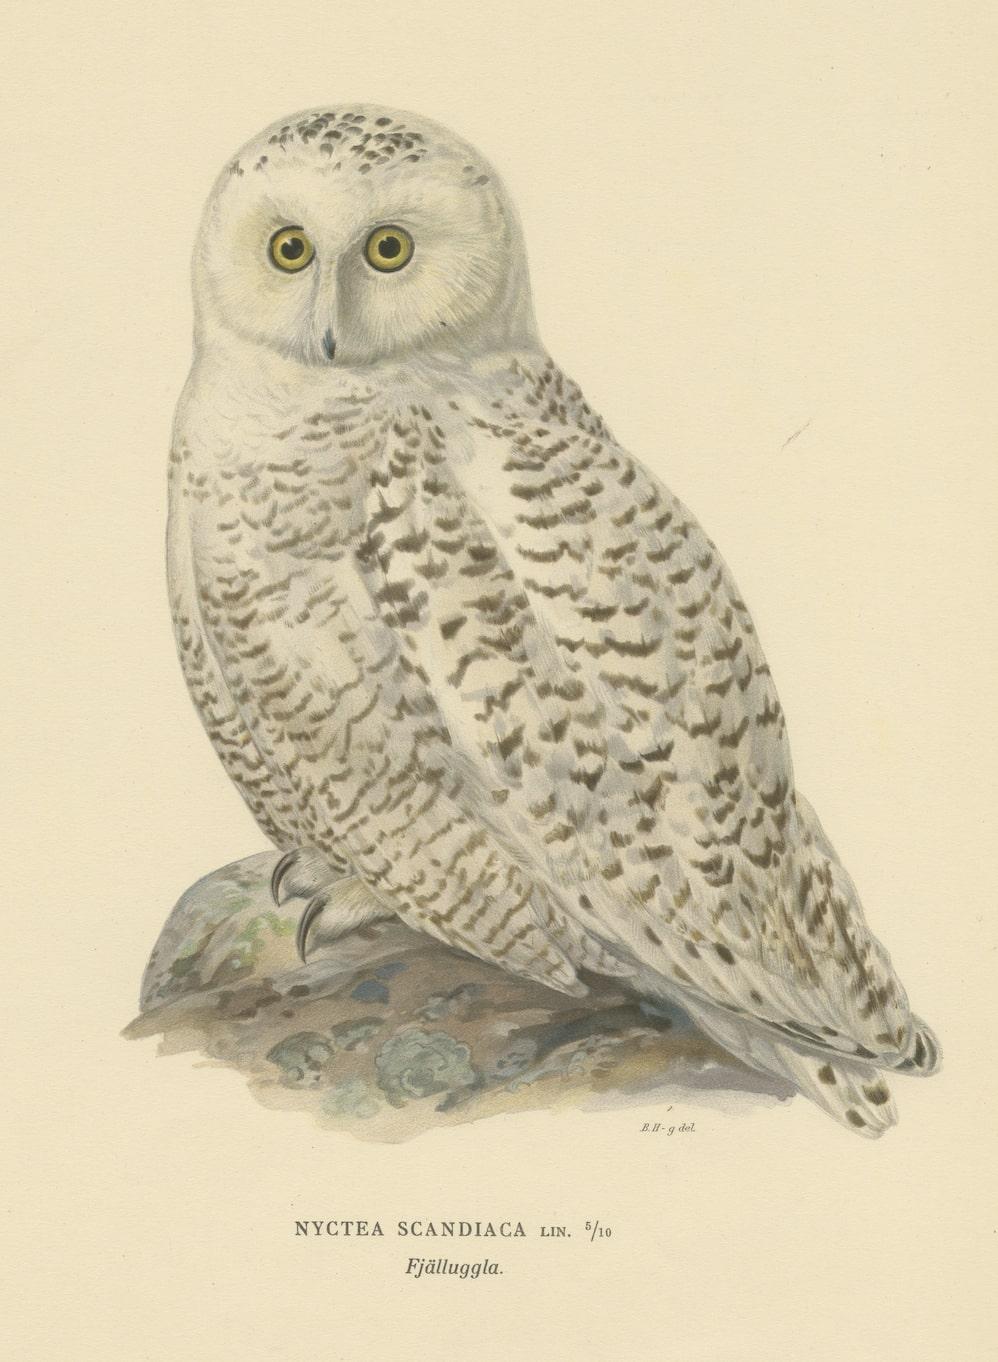 The Arctic Owl: A Magnificent Color Lithograph by Magnus Ferdinand and Wilhelm von Wright

This captivating color lithograph, depicting the Arctic Owl, stands as a testament to the artistic brilliance of Magnus Ferdinand and Wilhelm von Wright.